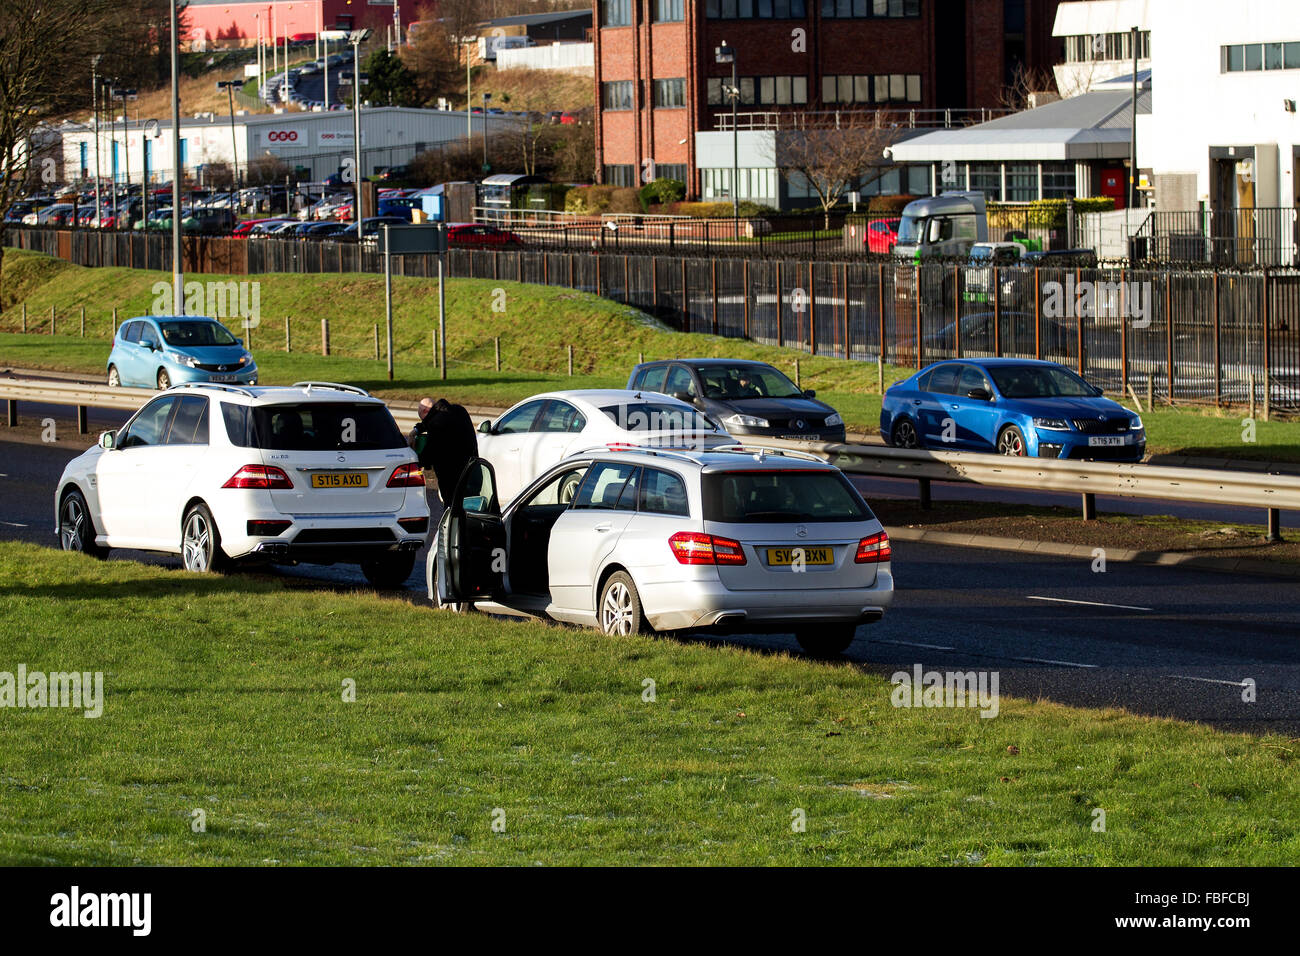 Motorist topping up a Mercedes-Benz car with petrol on the busy dual carriageway roadside in Dundee, UK Stock Photo